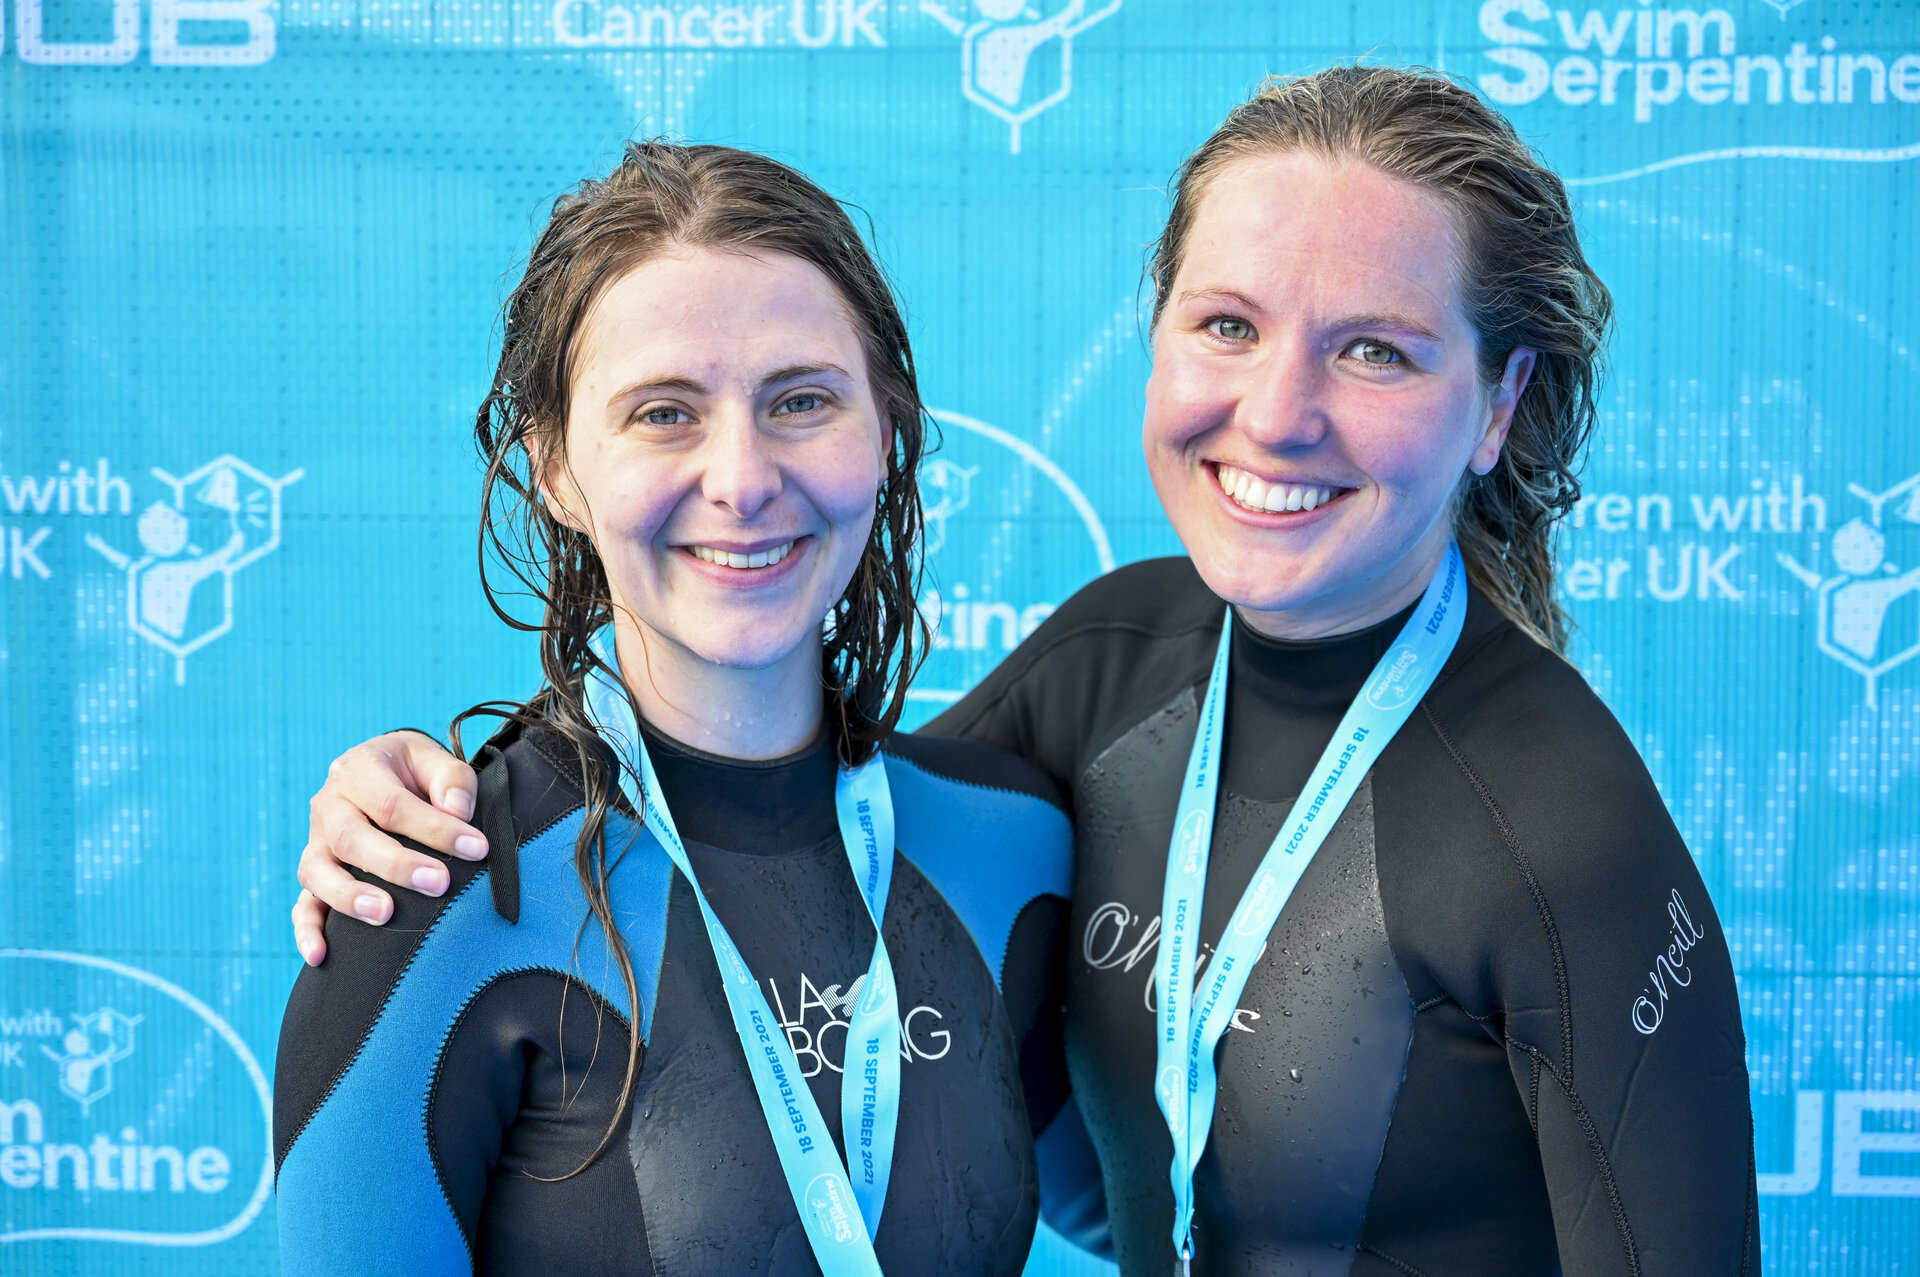 Swimmers who had completed the Swim Serpentine event on 18 September